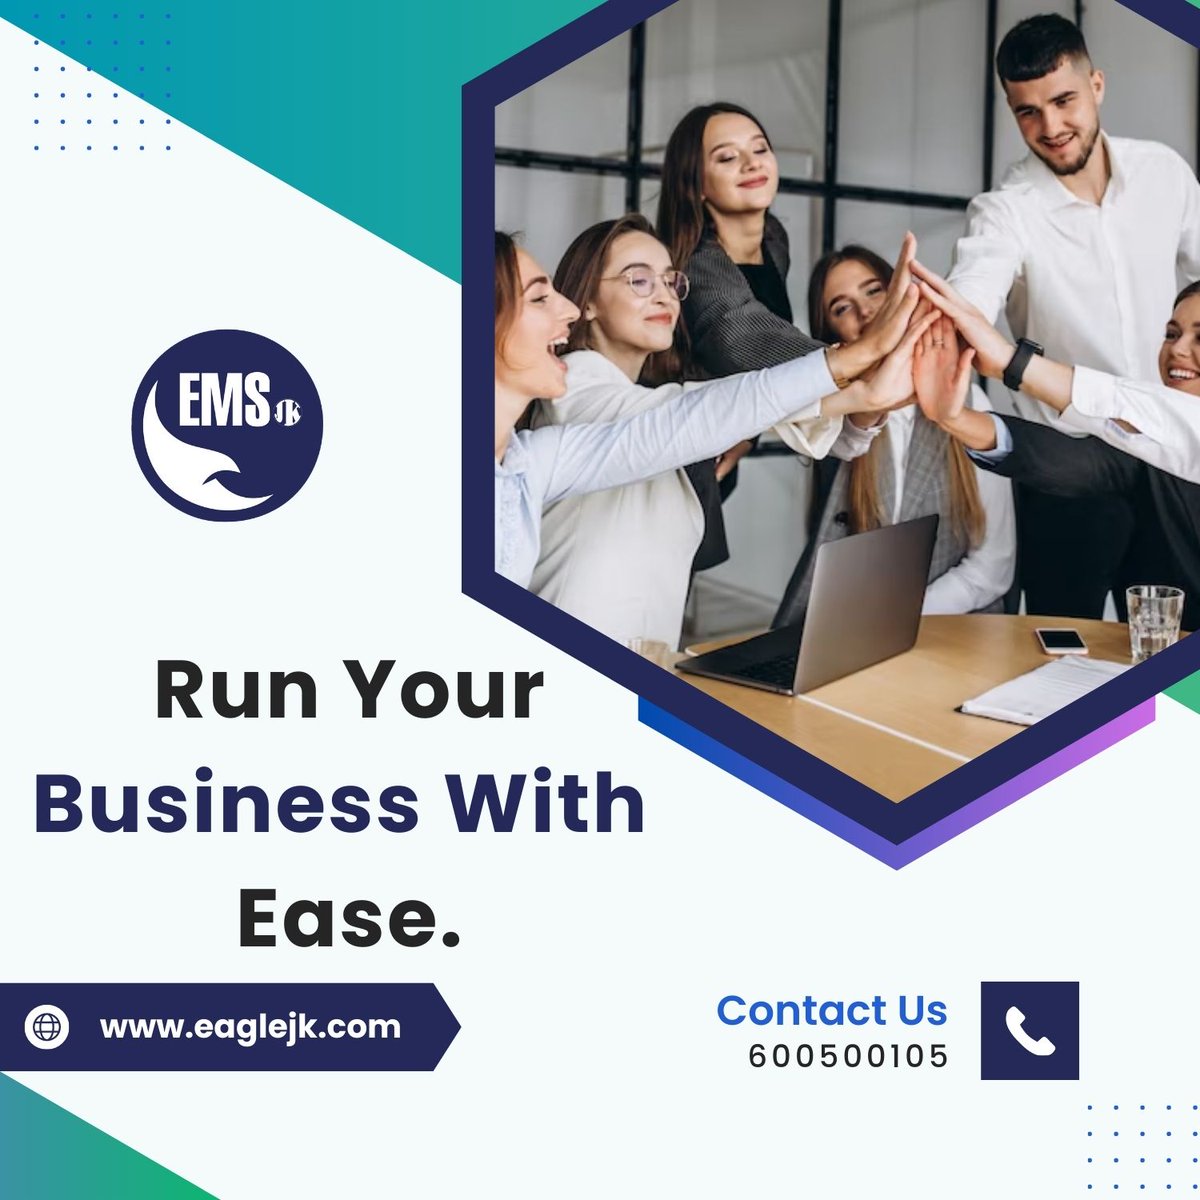 Want to renew your business trade license. Eagle Management is here to assist you every step of the way. Contact Us For more information- 600500105

#tradelicenserenewal #tradelicensedubai #RENEW #EMS #dubaiservices #abudhabi #uae #business